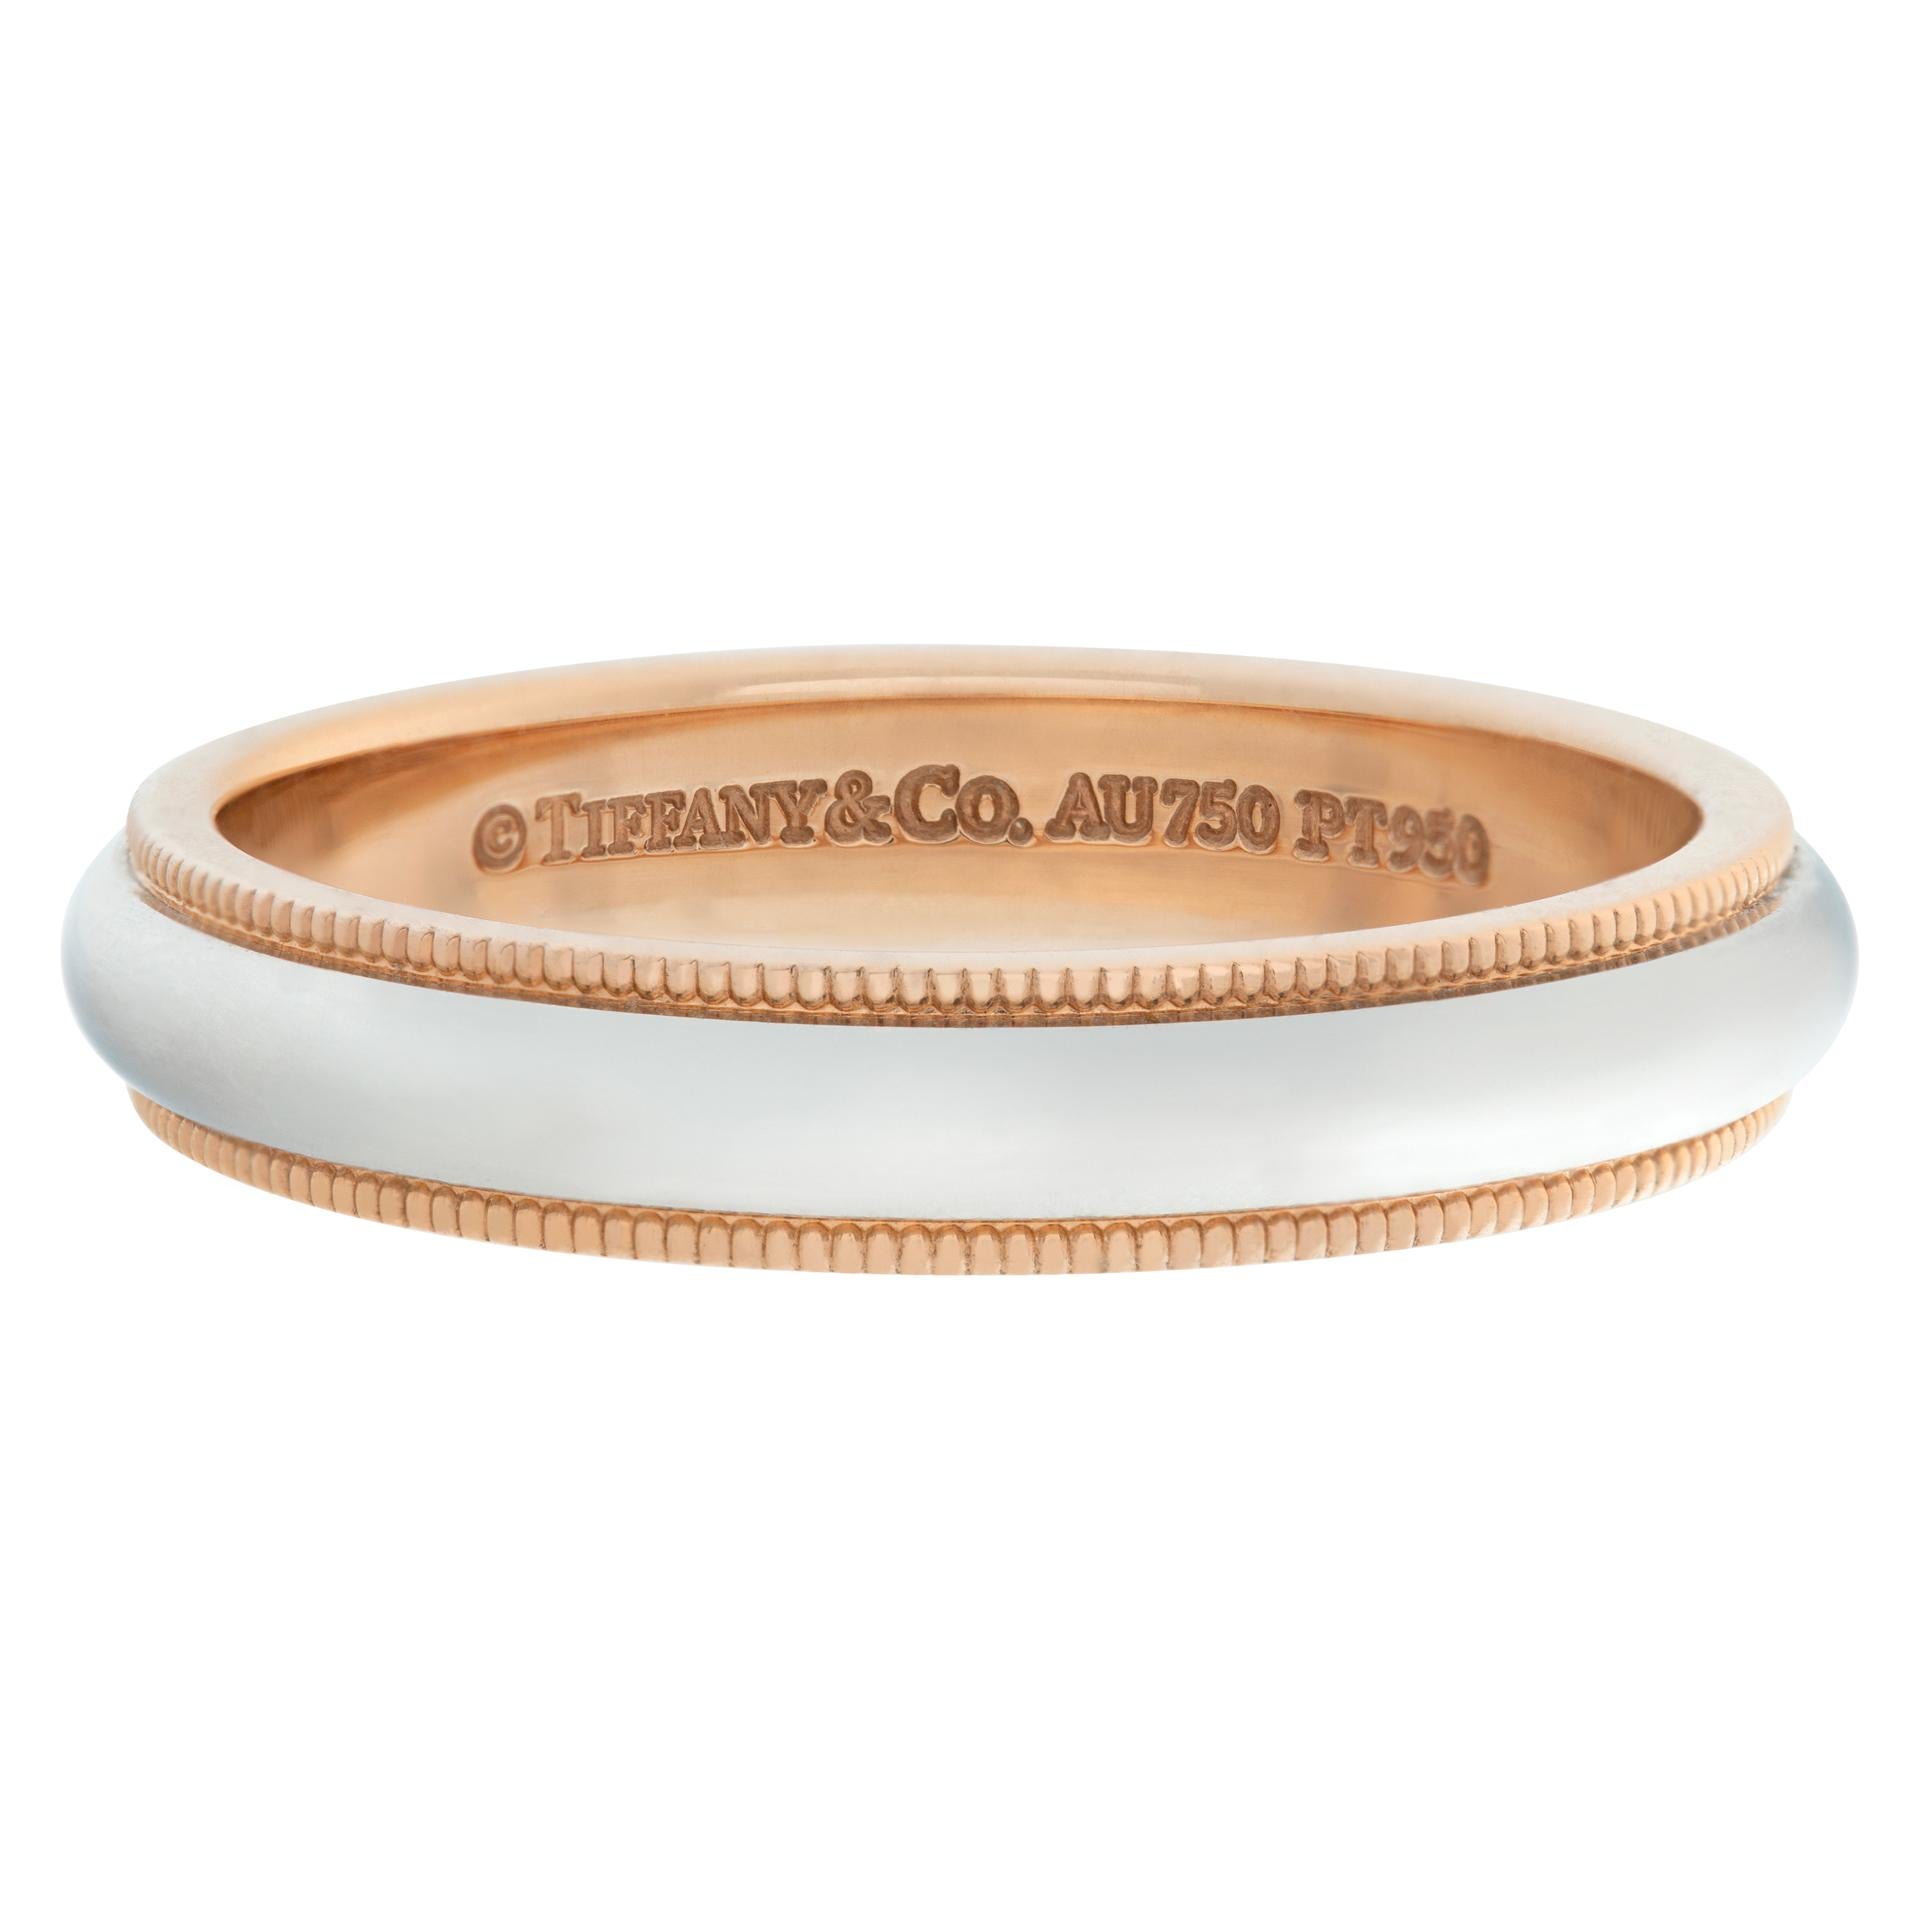 Tiffany & Co. wedding band 18k rose gold and platinum. Size 8.5, Circa 2021. 3.8 mm widthThis Tiffany & Co. ring is currently size 8.5 and some items can be sized up or down, please ask! It weighs 4.5 pennyweights and is 18k & Platinum.
